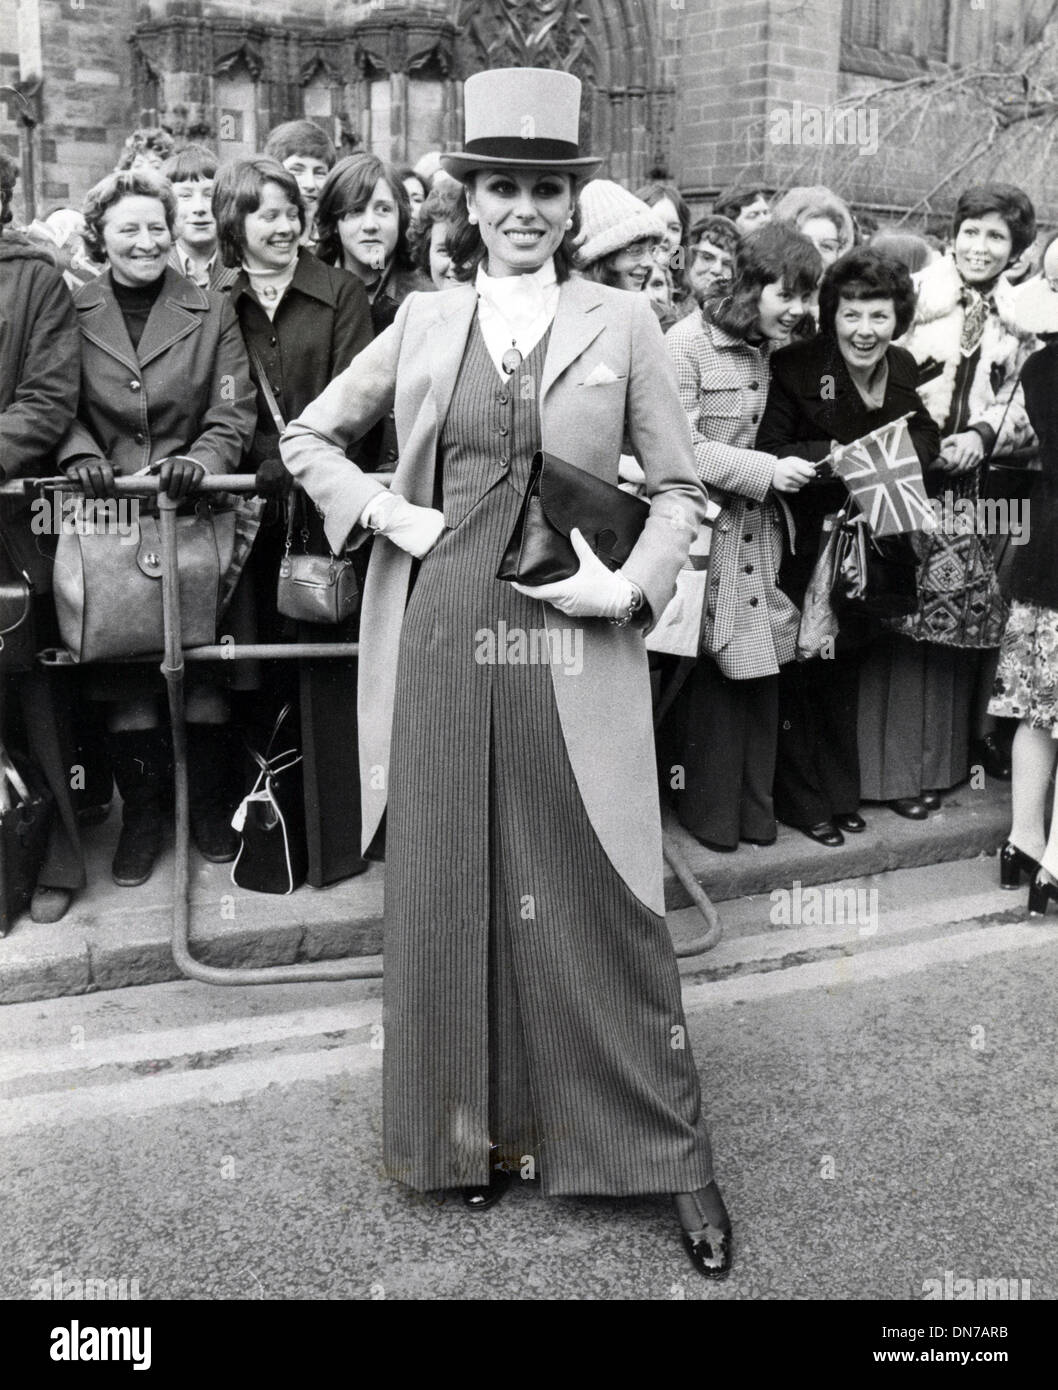 Mar. 10, 1975 - London, England, U.K. - Actress JOANNA LUMLEY and ex-girlfriend of the groom, stole the show when she arrived wearing a tail-coat and top hat for the wedding of Earl of Lichfield and Lady Leonora Grosvenor. Stock Photo